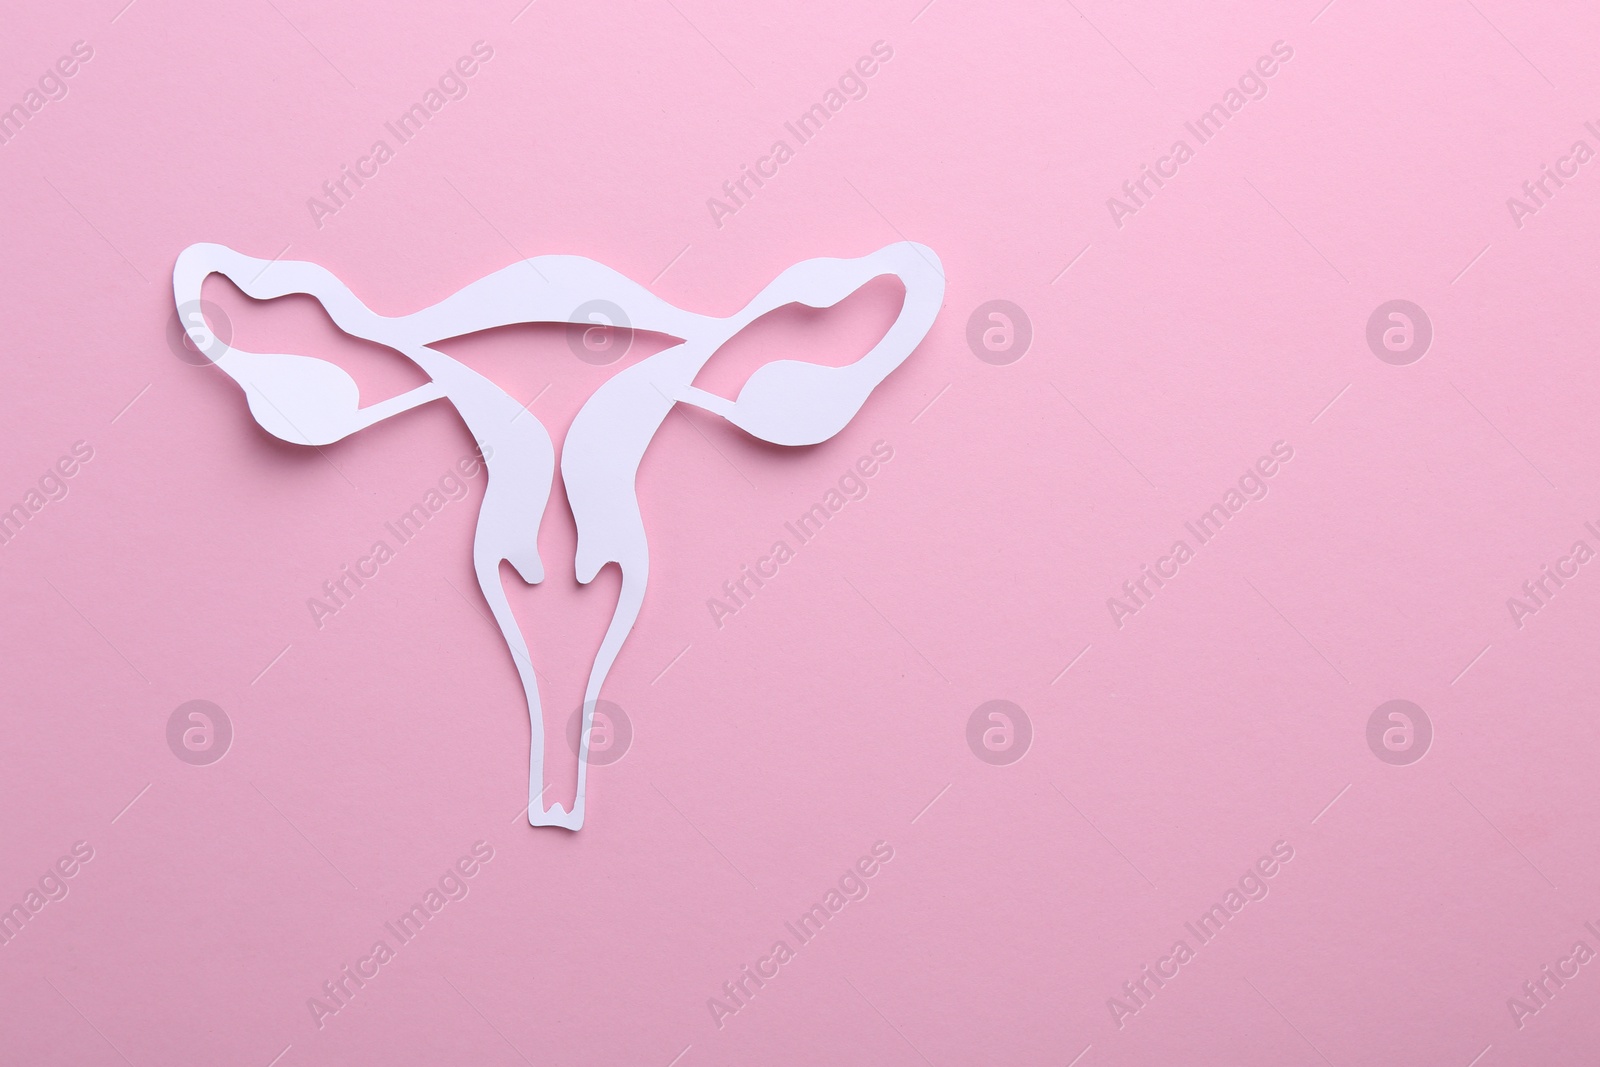 Photo of Reproductive medicine. Paper uterus on pink background, top view with space for text